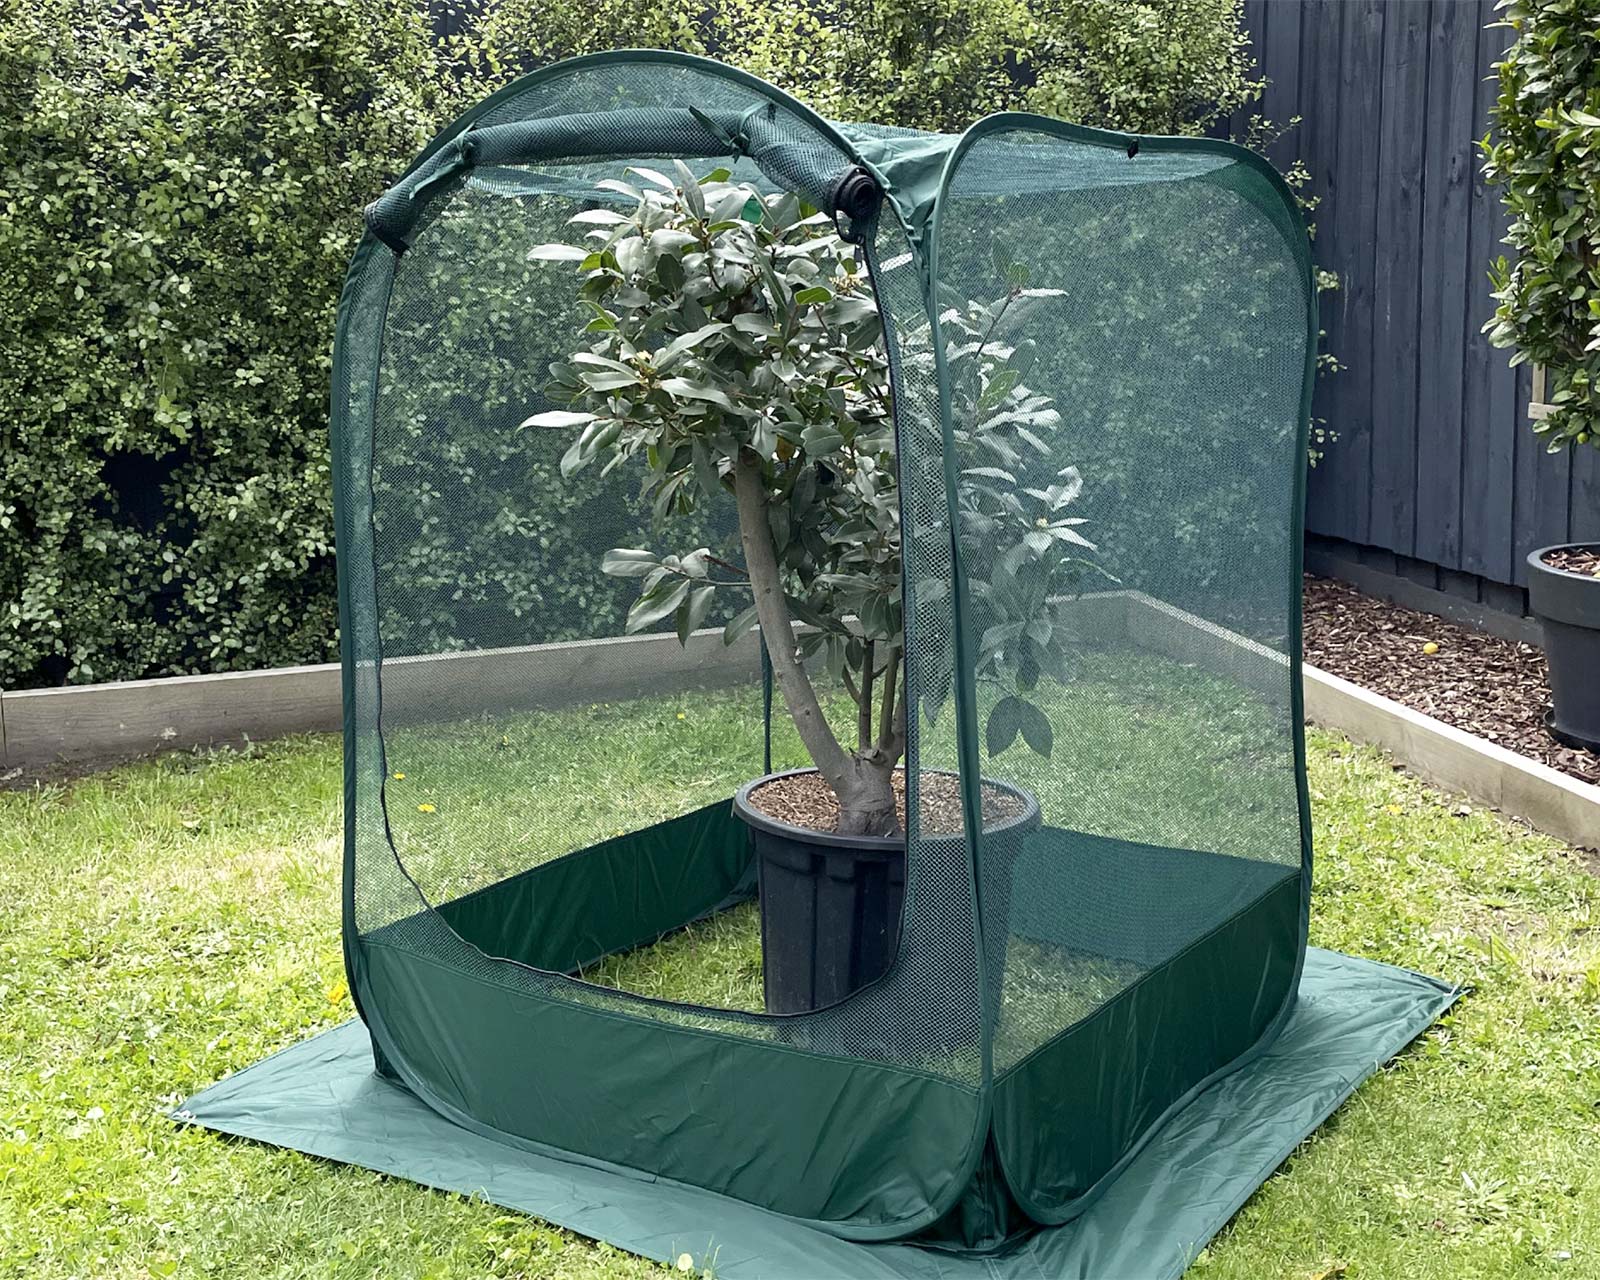 Pop Up Net Plant cover 1x1x1.25 - tall enough to protect taller plants